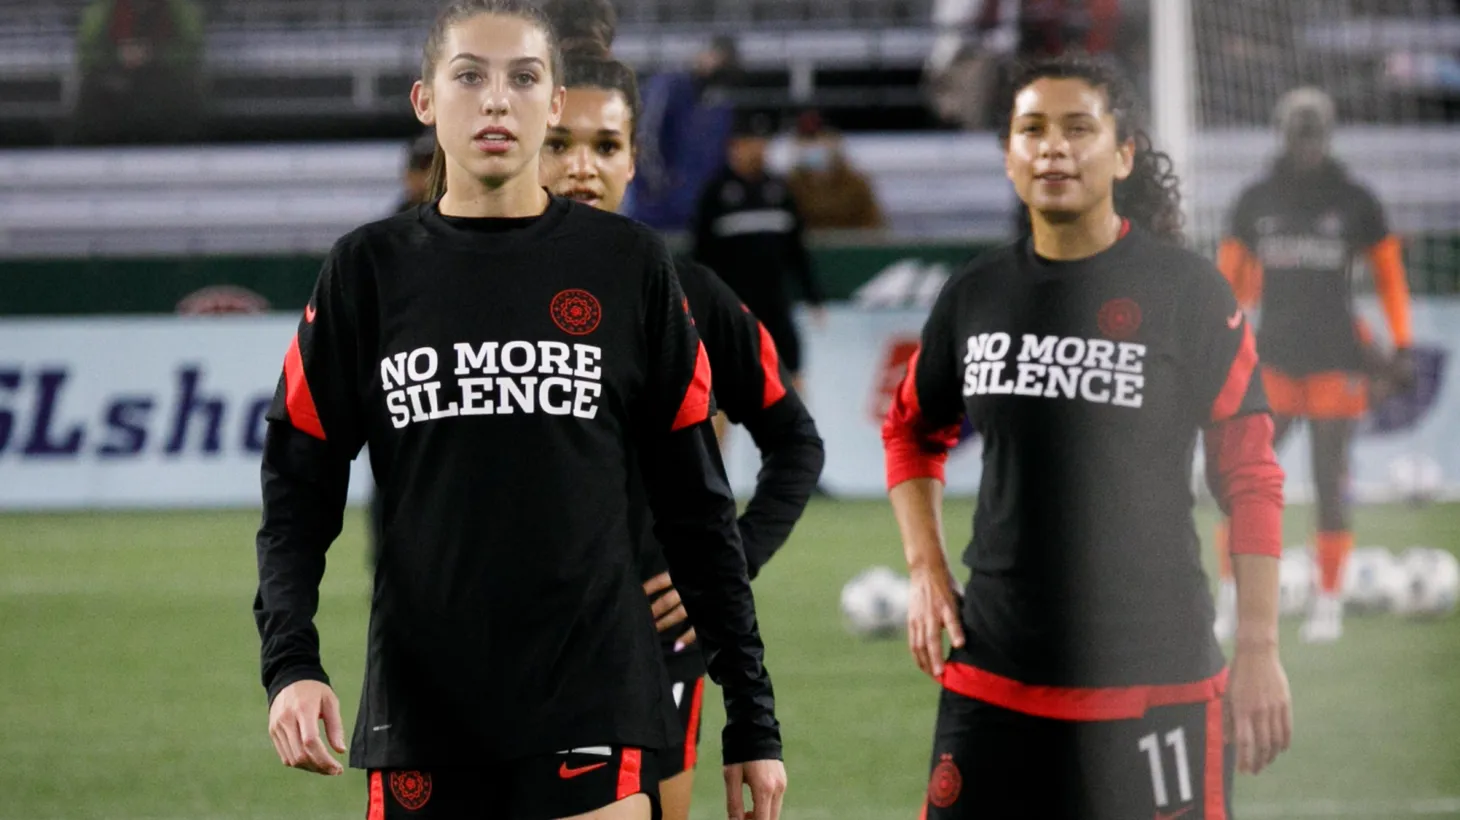 The Portland Thorns' warm-up shirts say "No More Silence." The Houston Dash narrowly defeated the Thorns 3-2 on October 6, 2021 at Providence Park in Portland, Oregon. This was the first Thorns match after the temporary hiatus in National Women’s Soccer when the Paul Riley sexual harassment scandal broke.